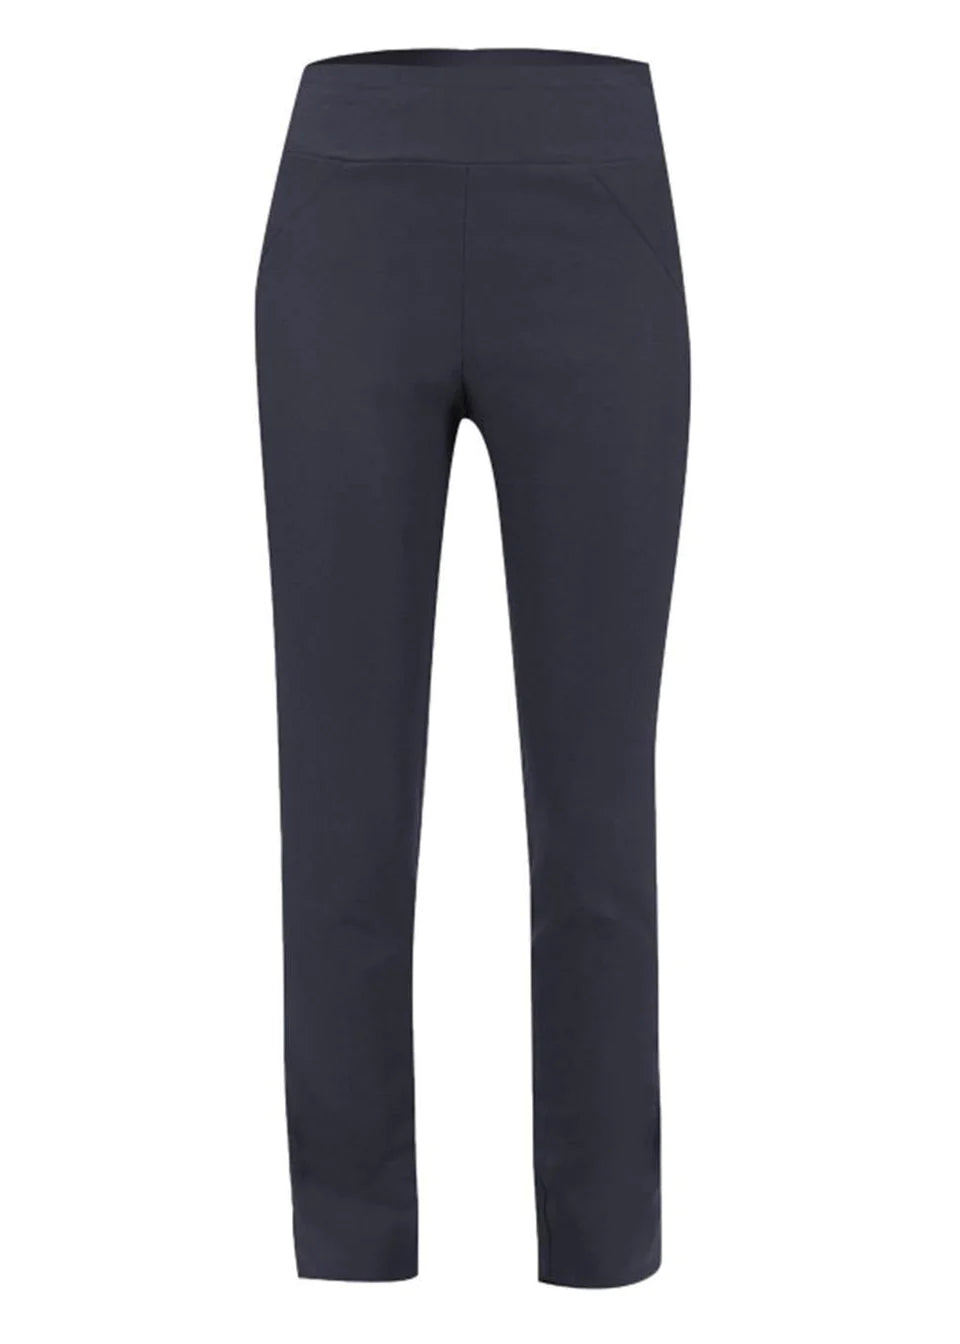 Verge Premier Pant -French Ink